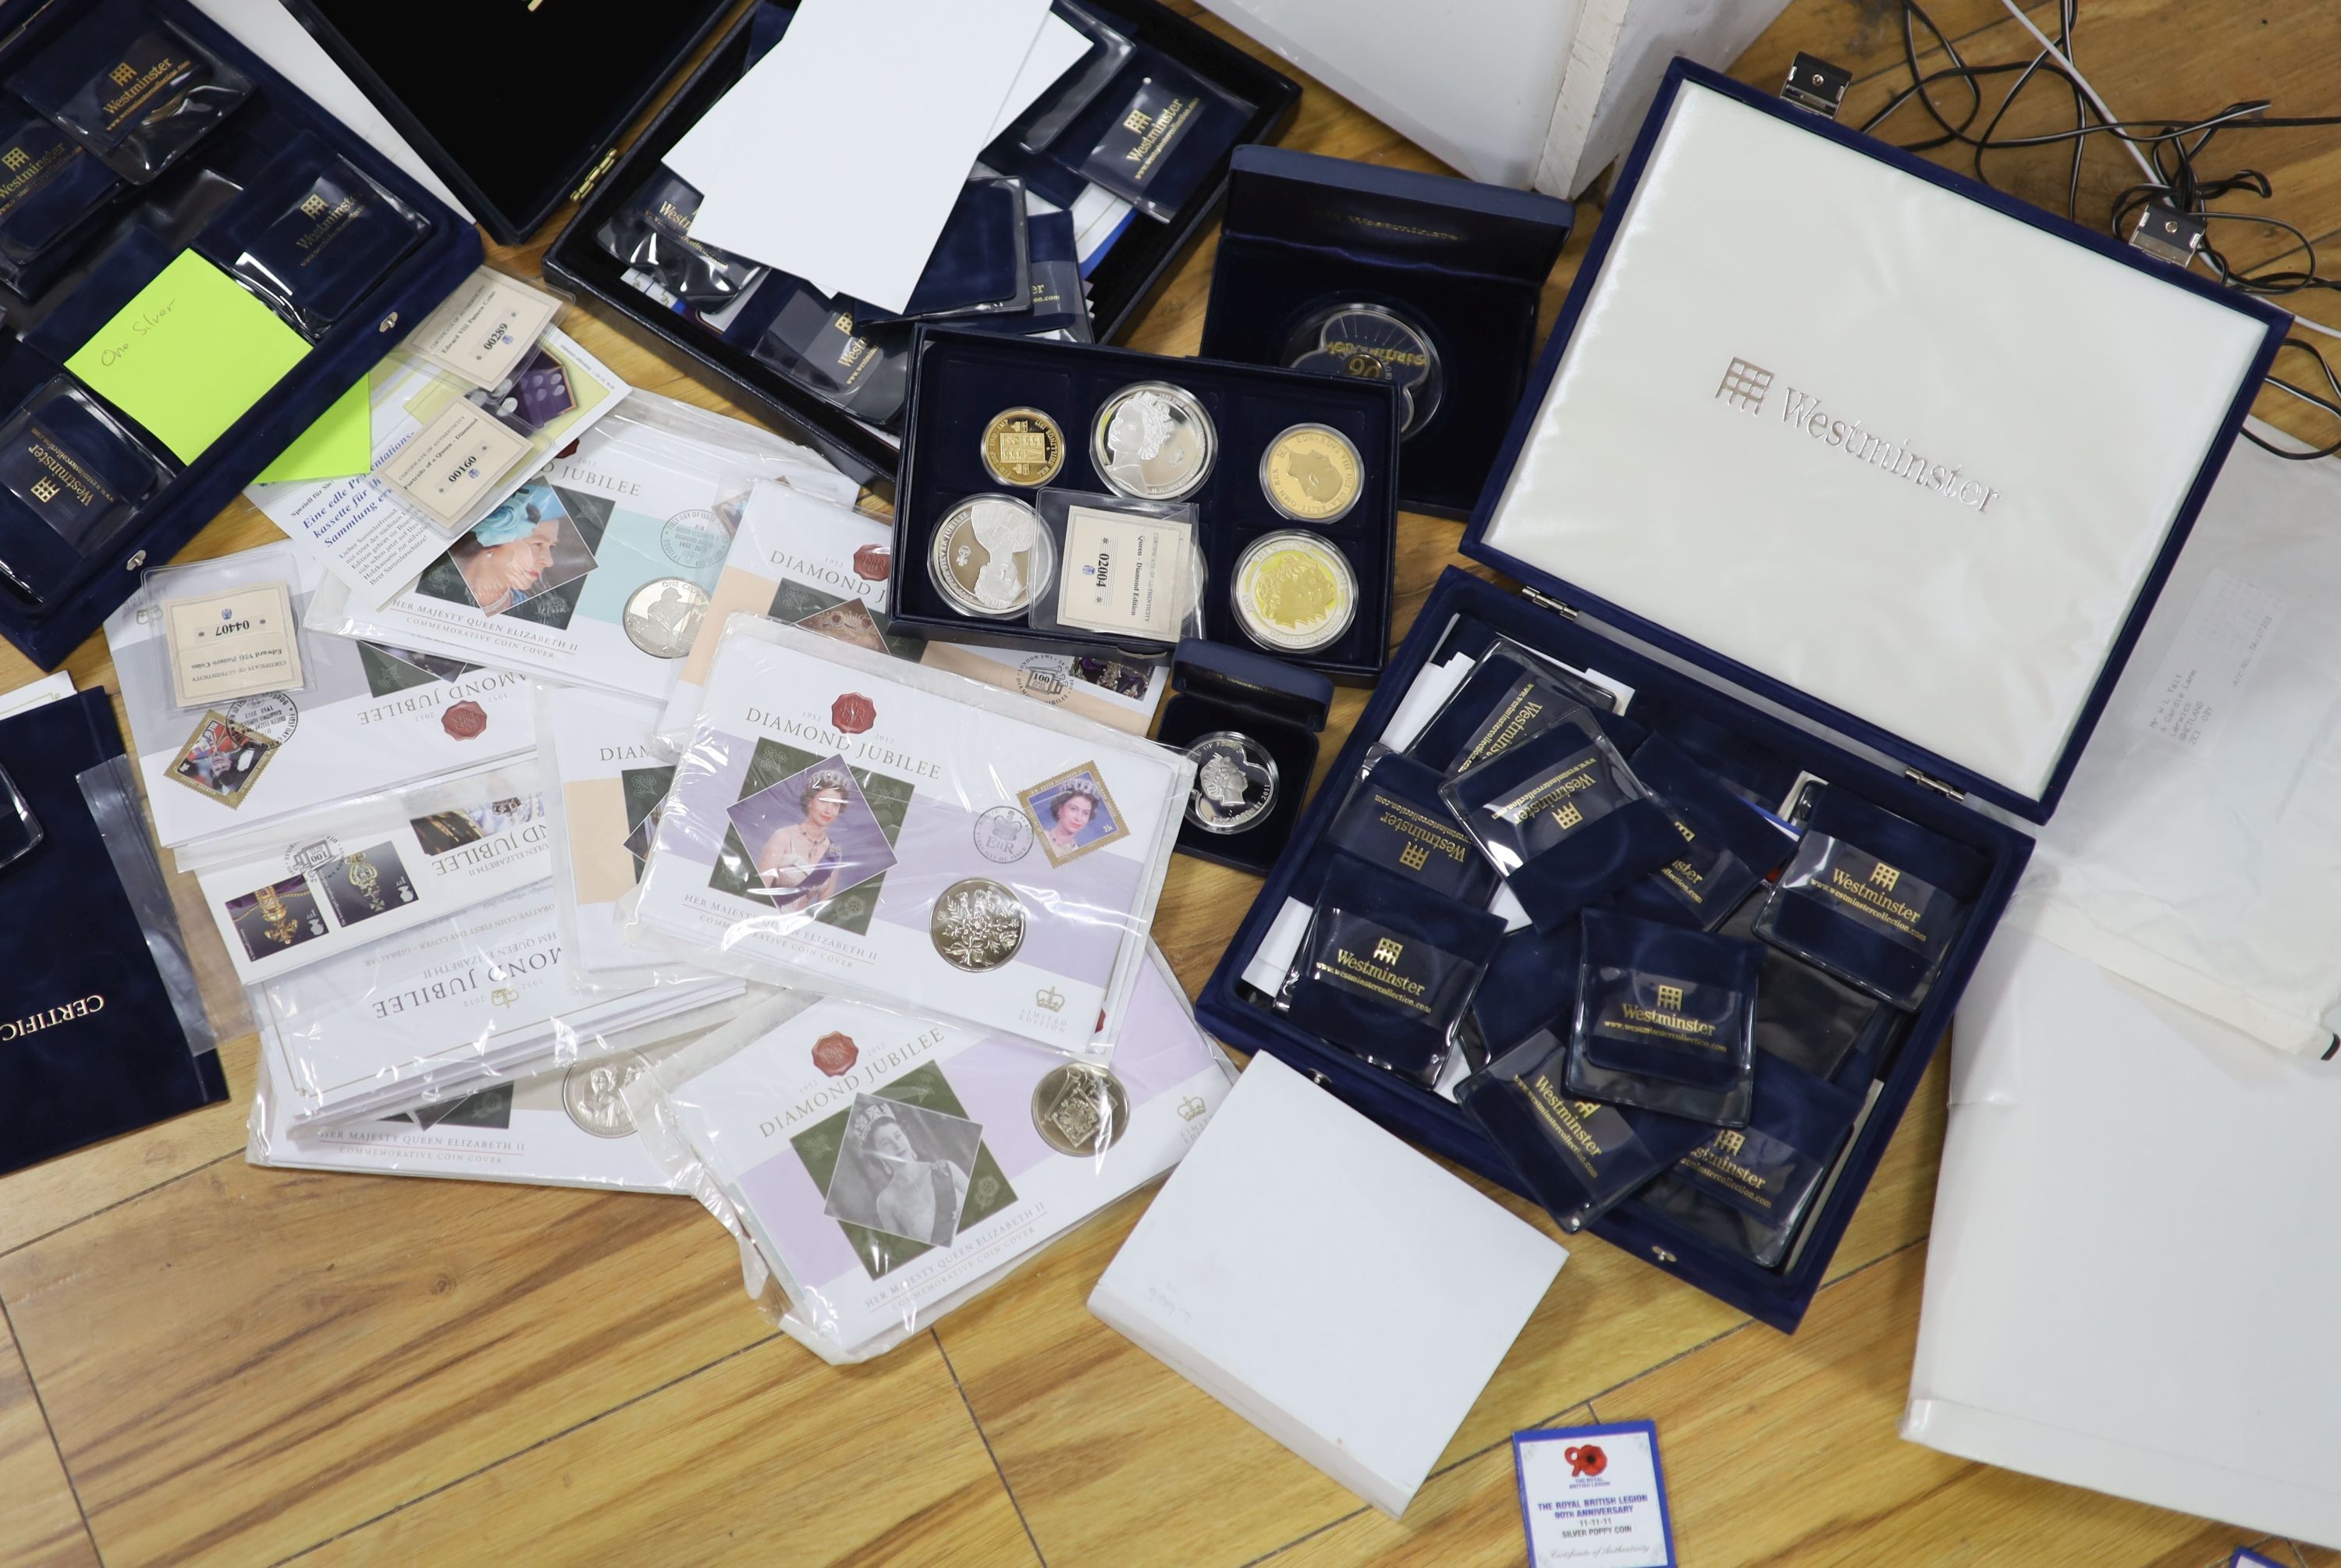 A collection of Westminster & Royal Mint QEII commemorative coins, some silver issues